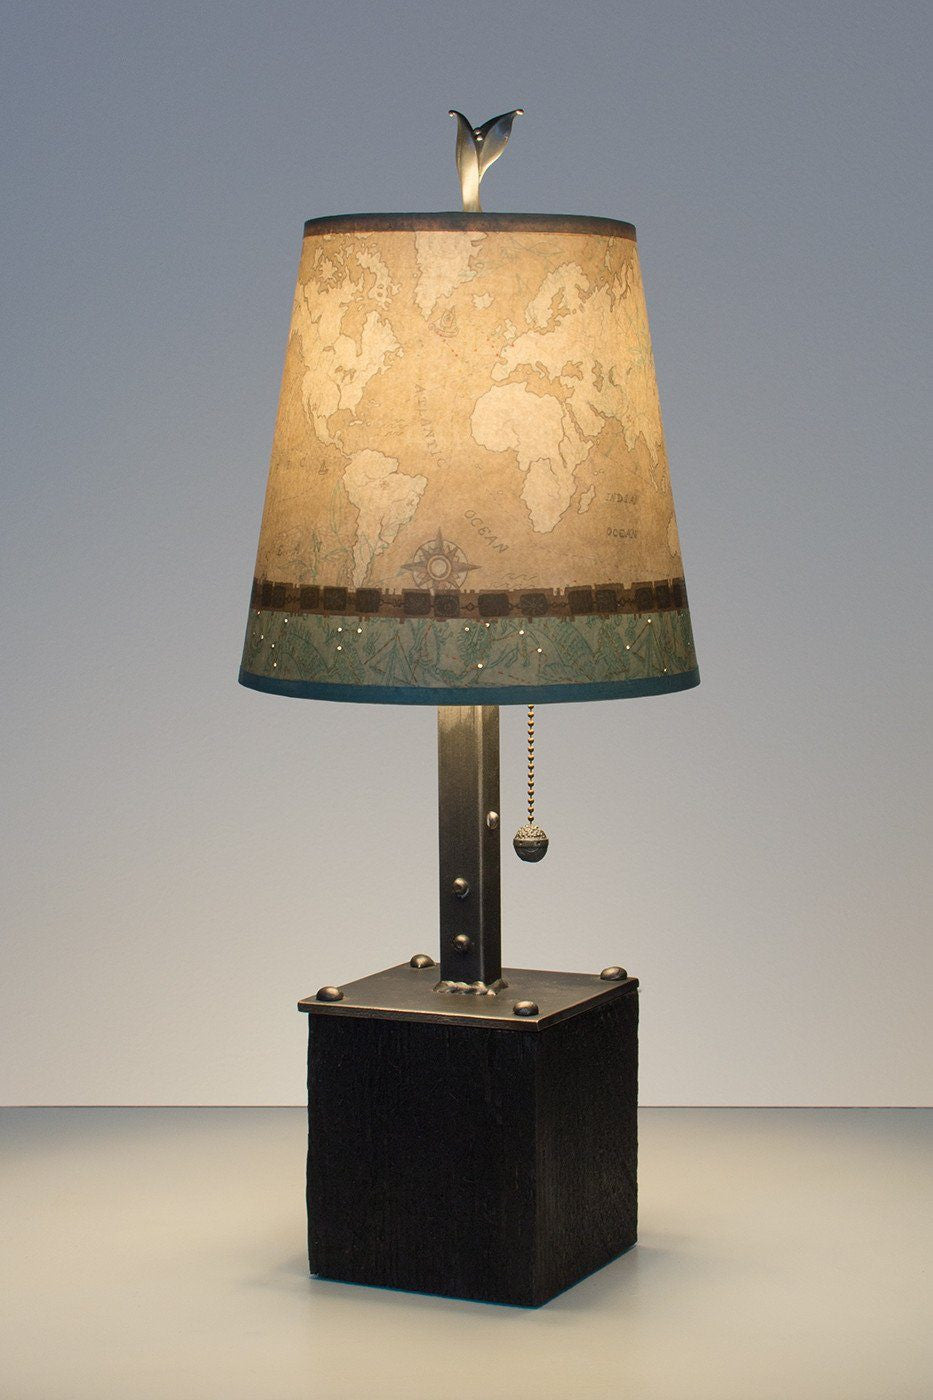 Janna Ugone & Co Table Lamps Steel Table Lamp on Reclaimed Wood with Small Drum Shade in Voyages